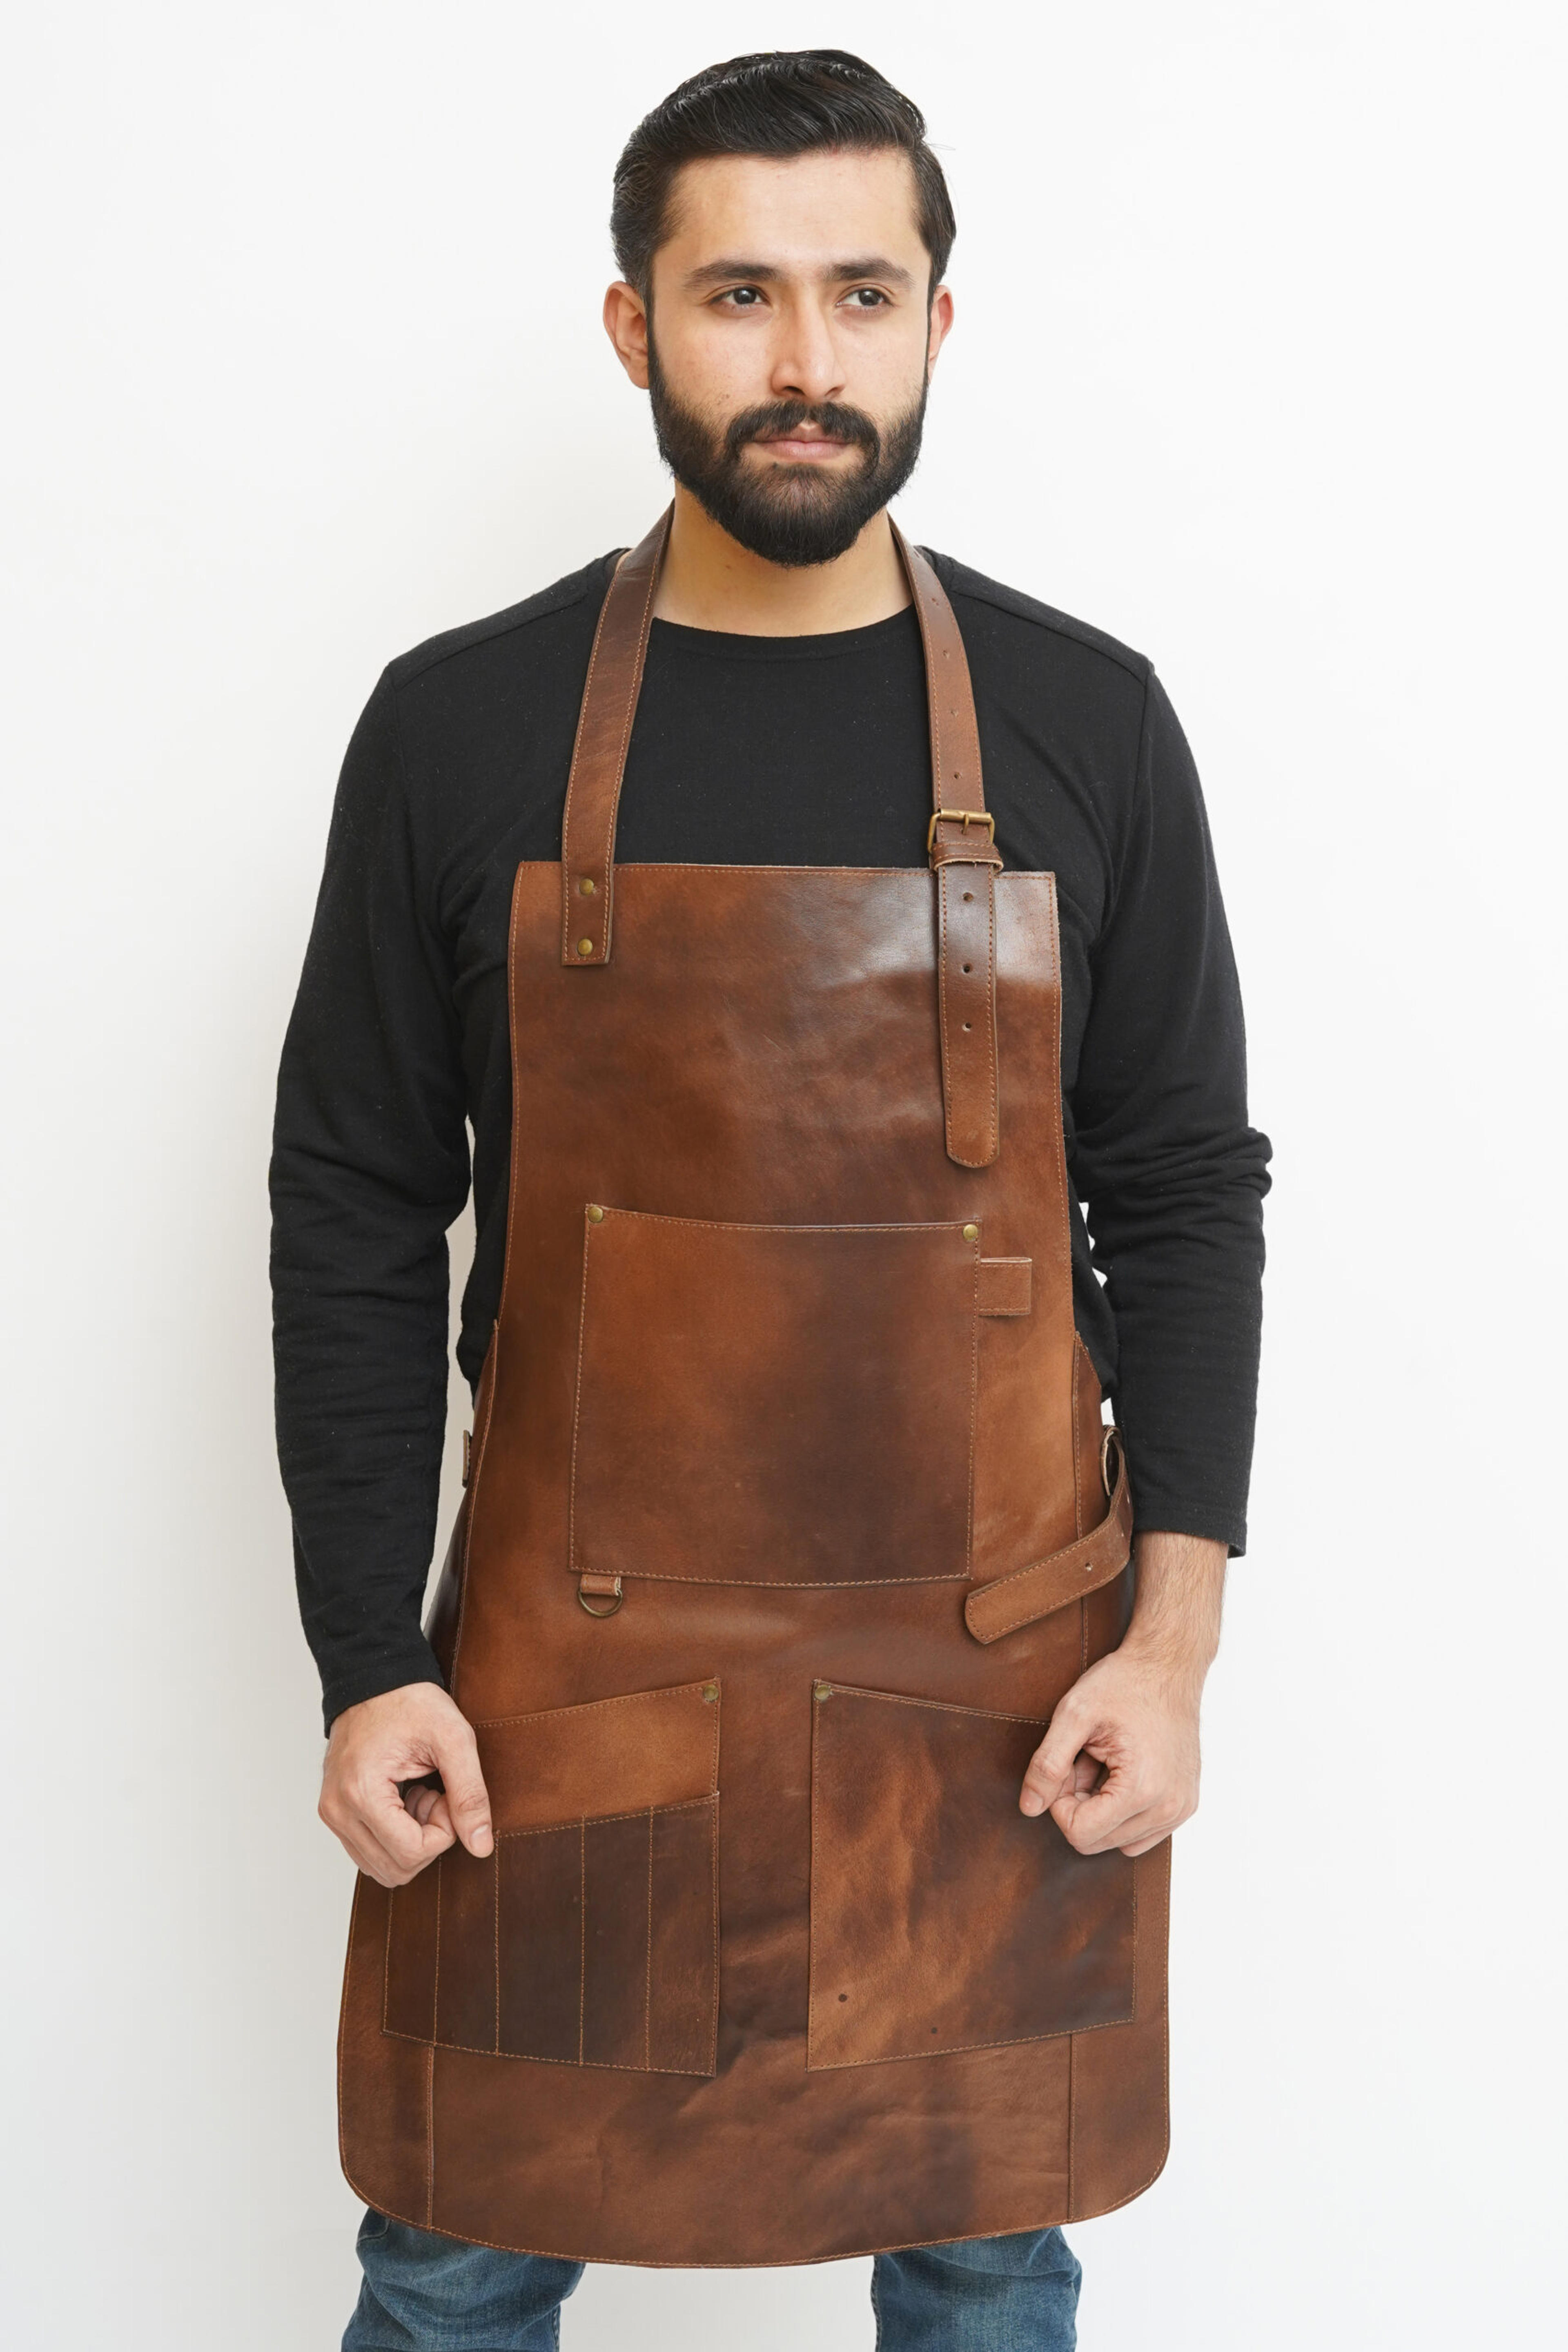 Men’s Genuine Leather Apron with Pockets